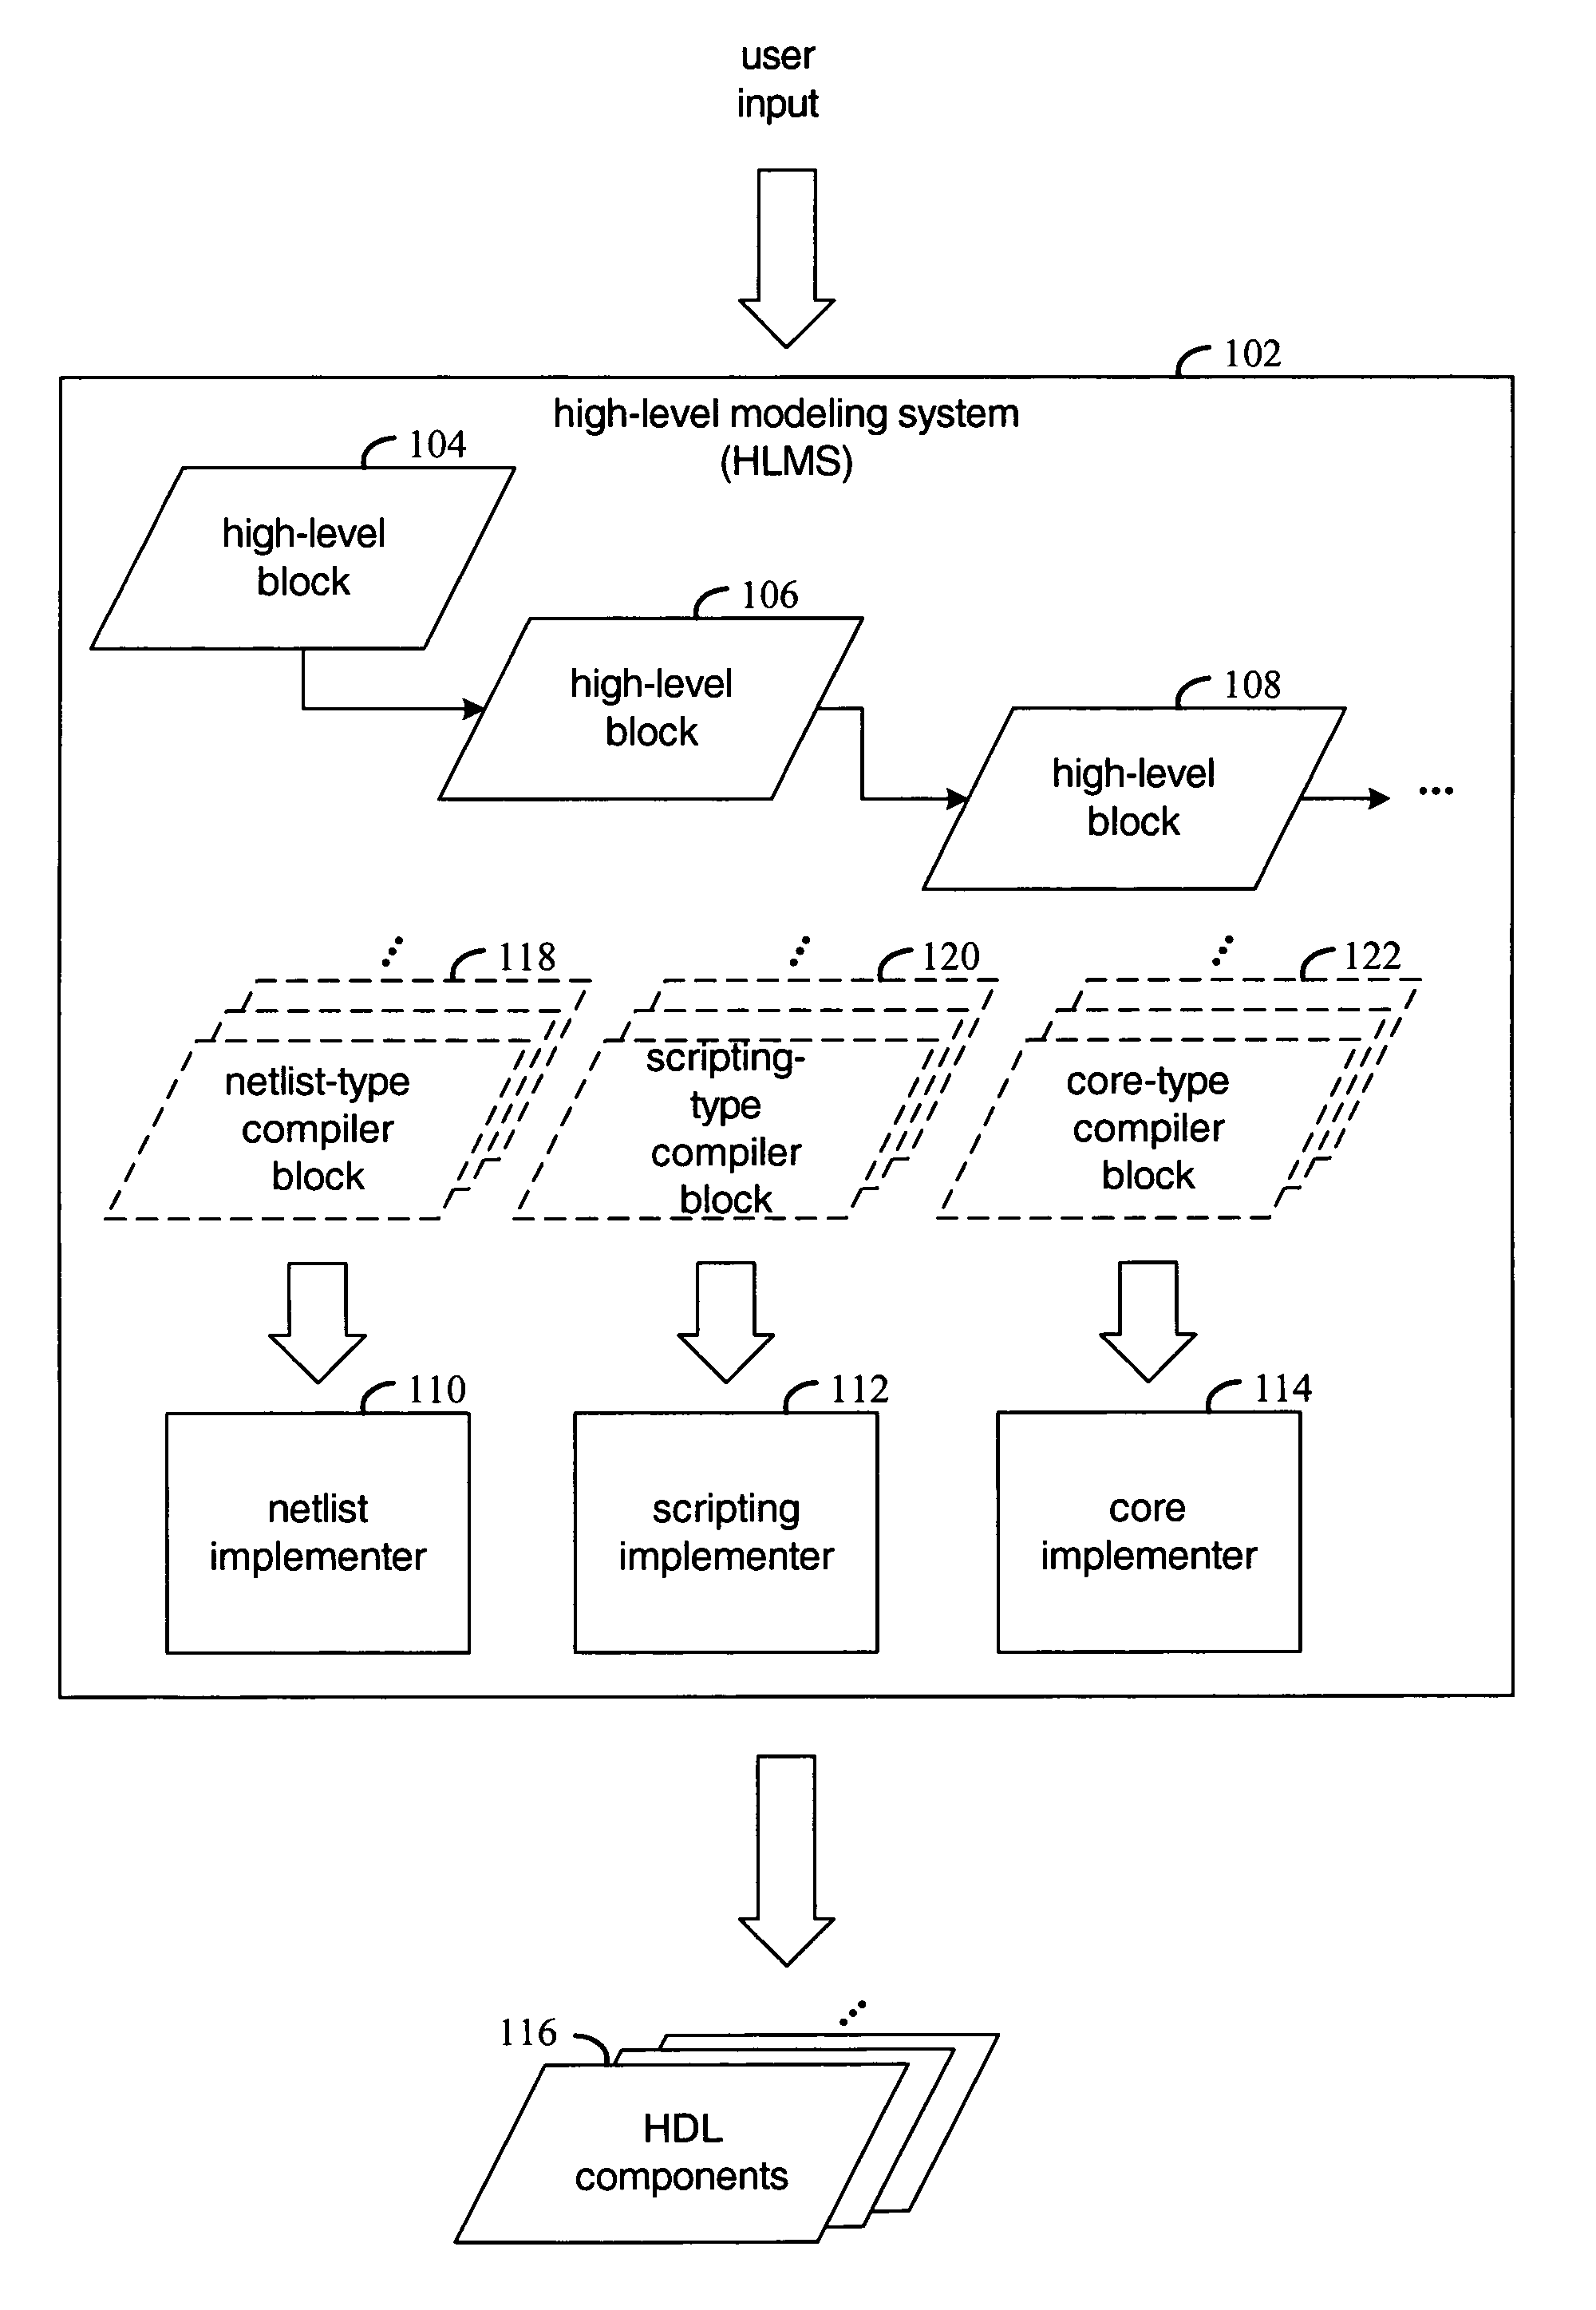 Compilation in a high-level modeling system